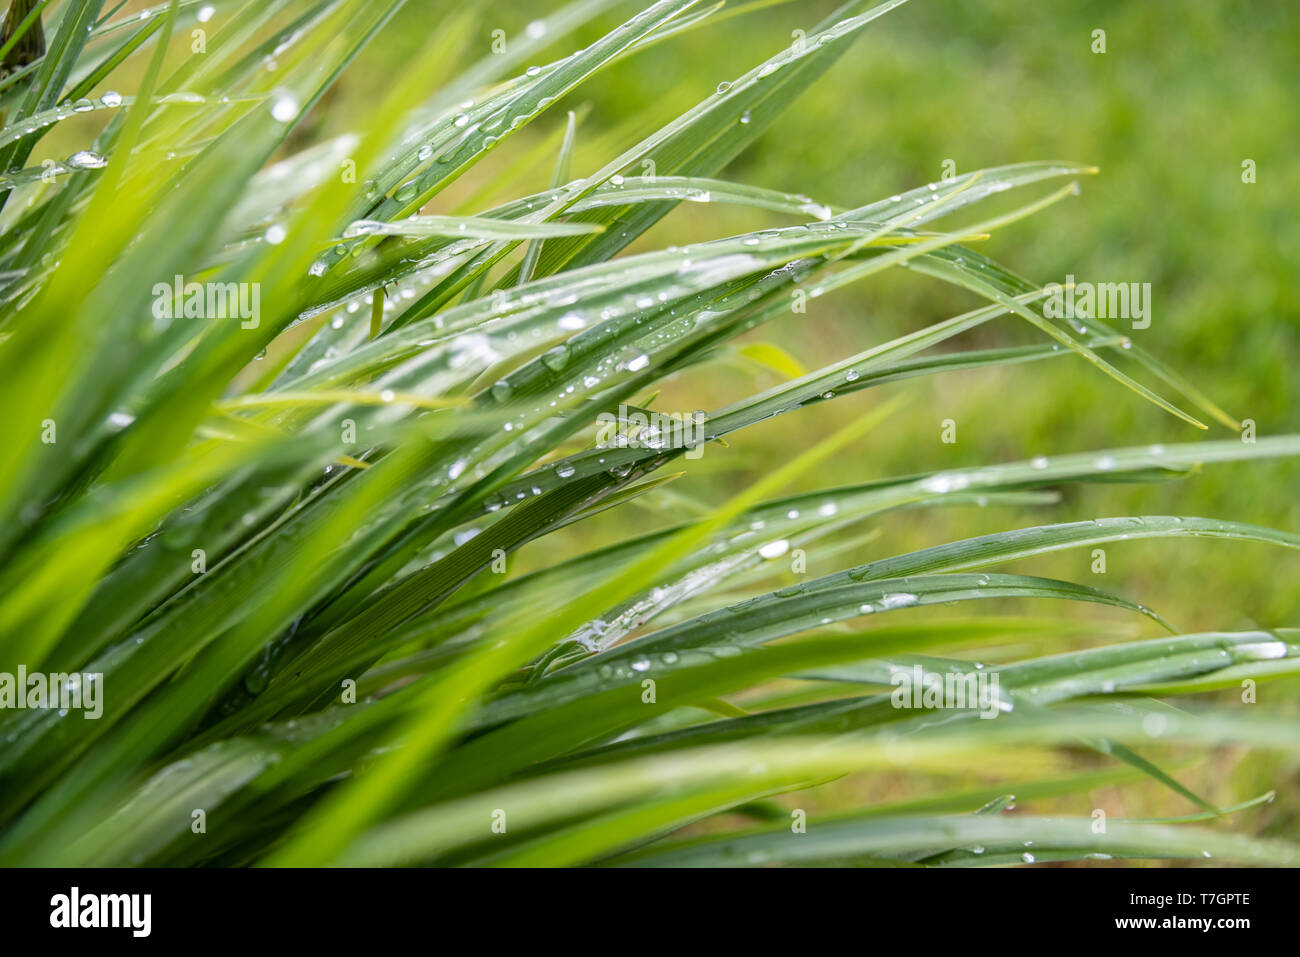 Following a heavy rain shower, small water droplets nestle precariously on a thatch of reeds in a local garden in Carrickfergus, Northern Ireland. Stock Photo